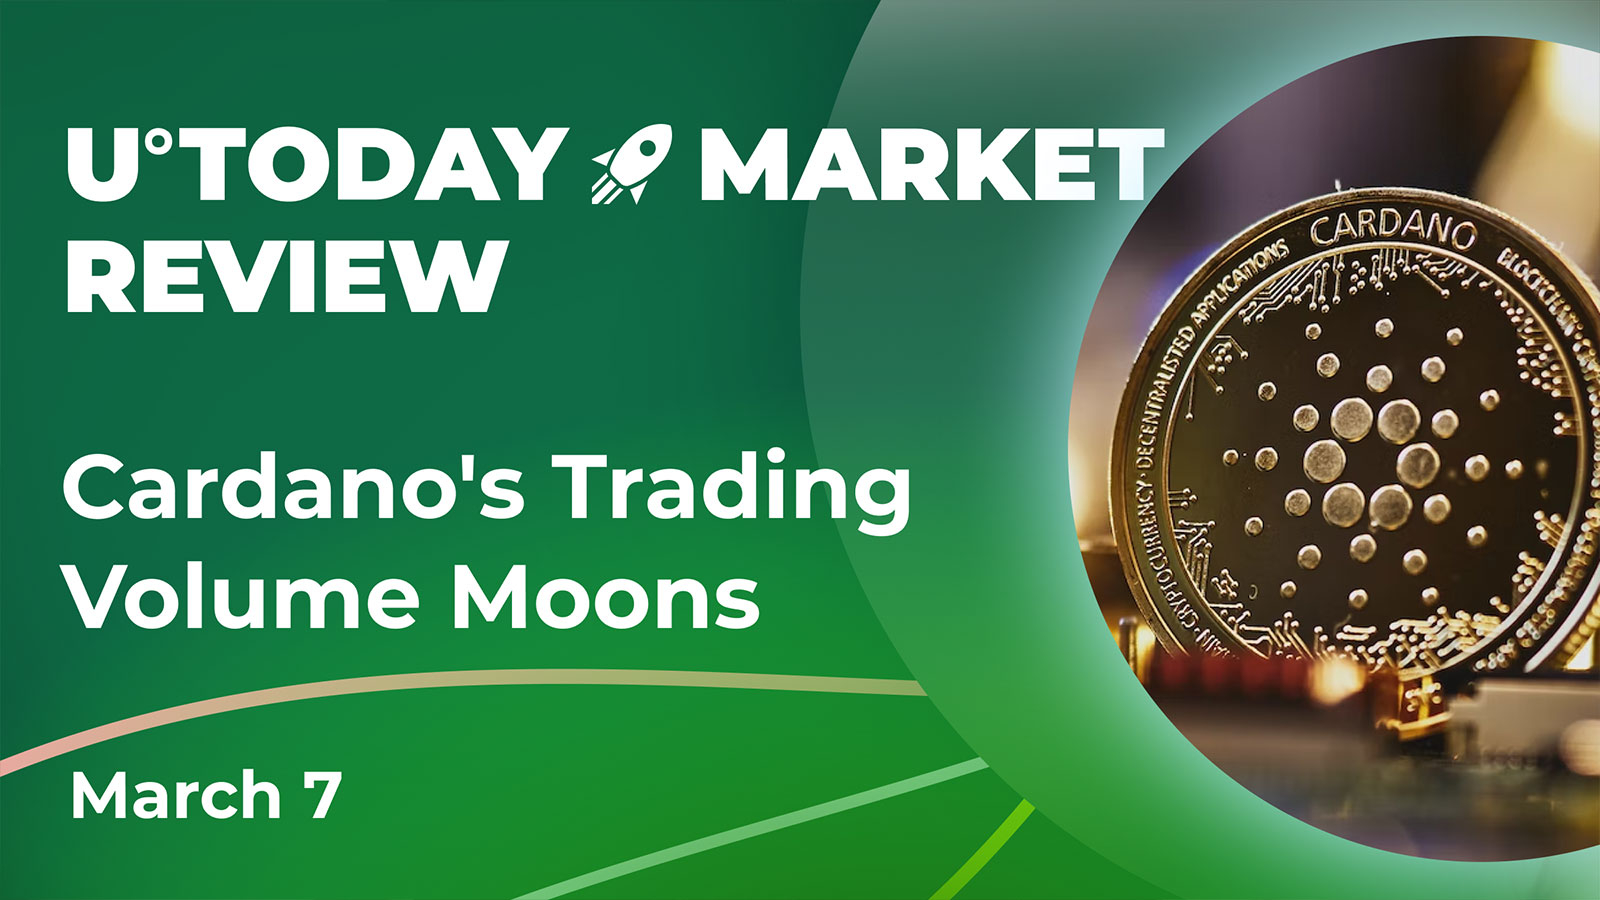 Cardano Trading Volume Moons to 23 Billion ADA, Could This Spark New Bull Run?